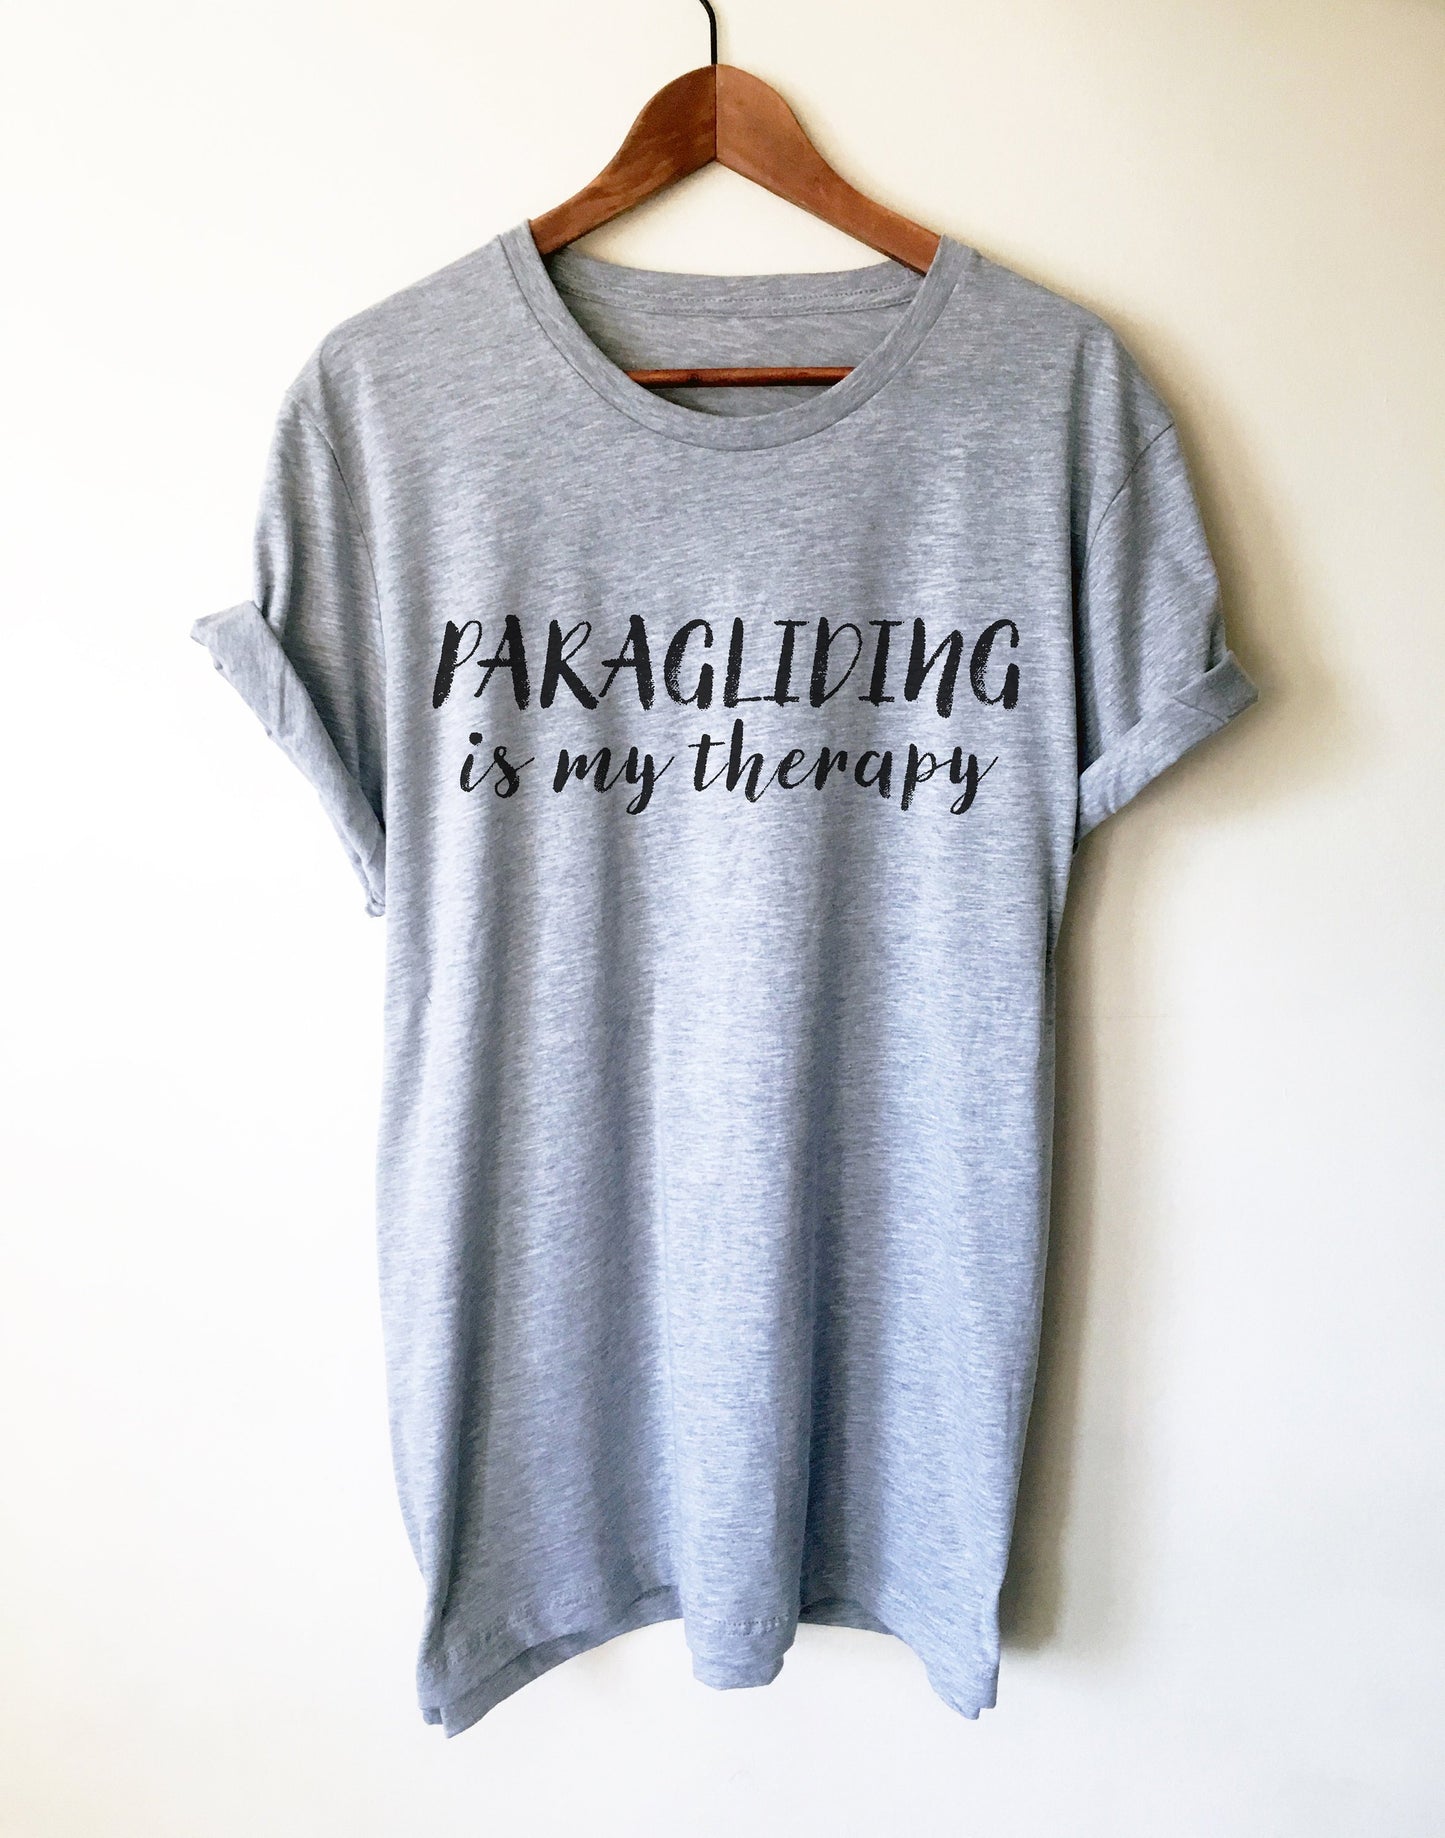 Paragliding Is My Therapy Unisex Shirt - Paragliding Shirt, Paragliding Gift, Adventure Awaits, Paraglider Shirt, Paraglider Gift